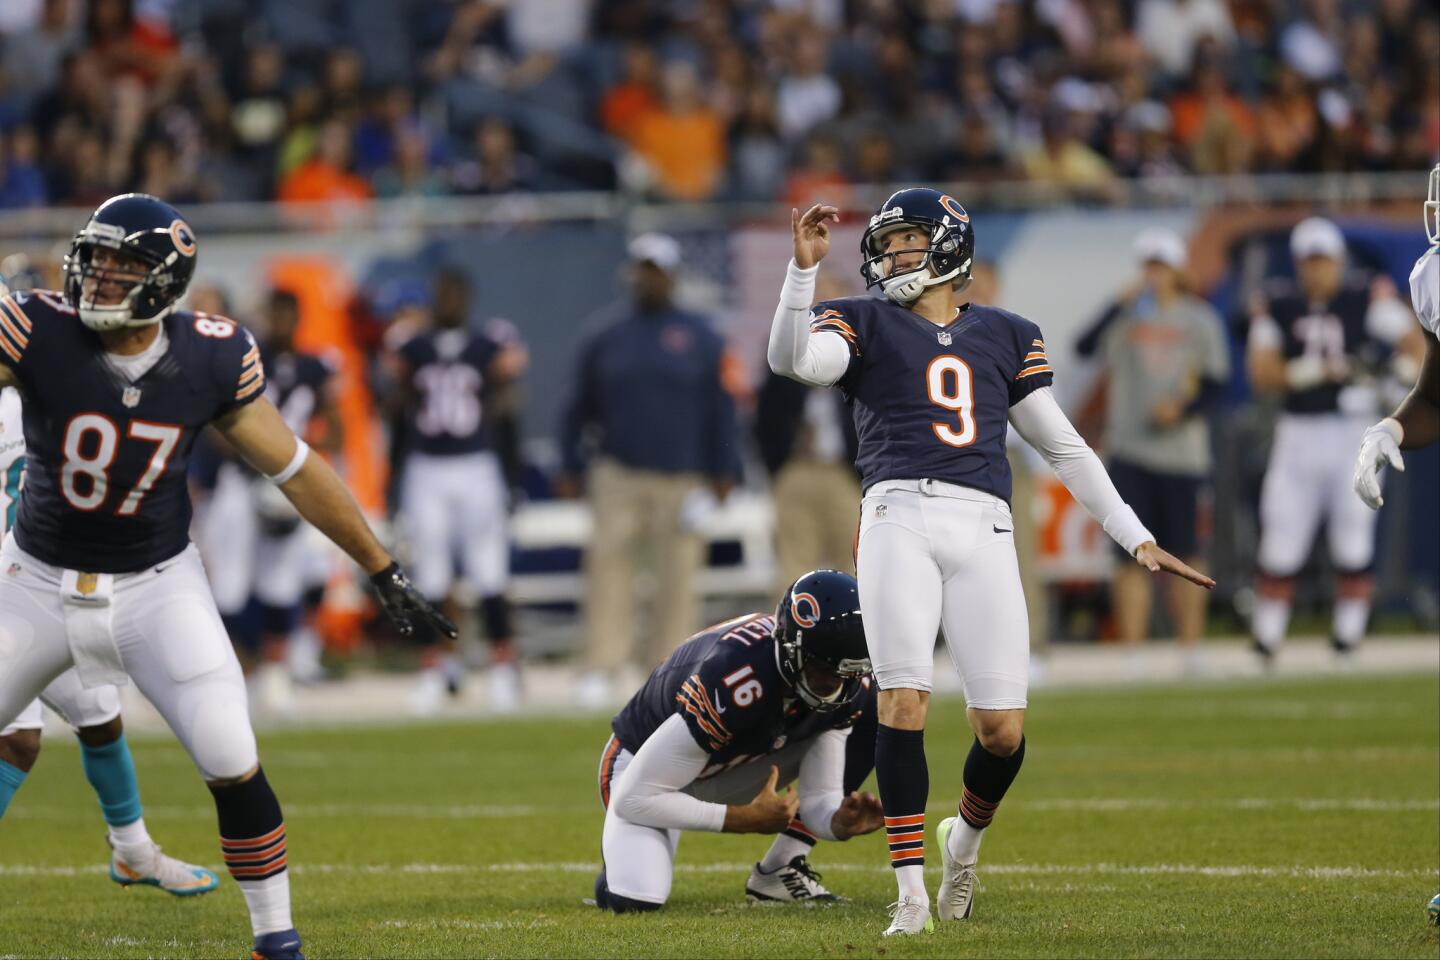 Robbie Gould kicks a field goal front he hold of punter Pat O'Donnell during the first half of a preseason game against the Dolphins at Soldier Field.